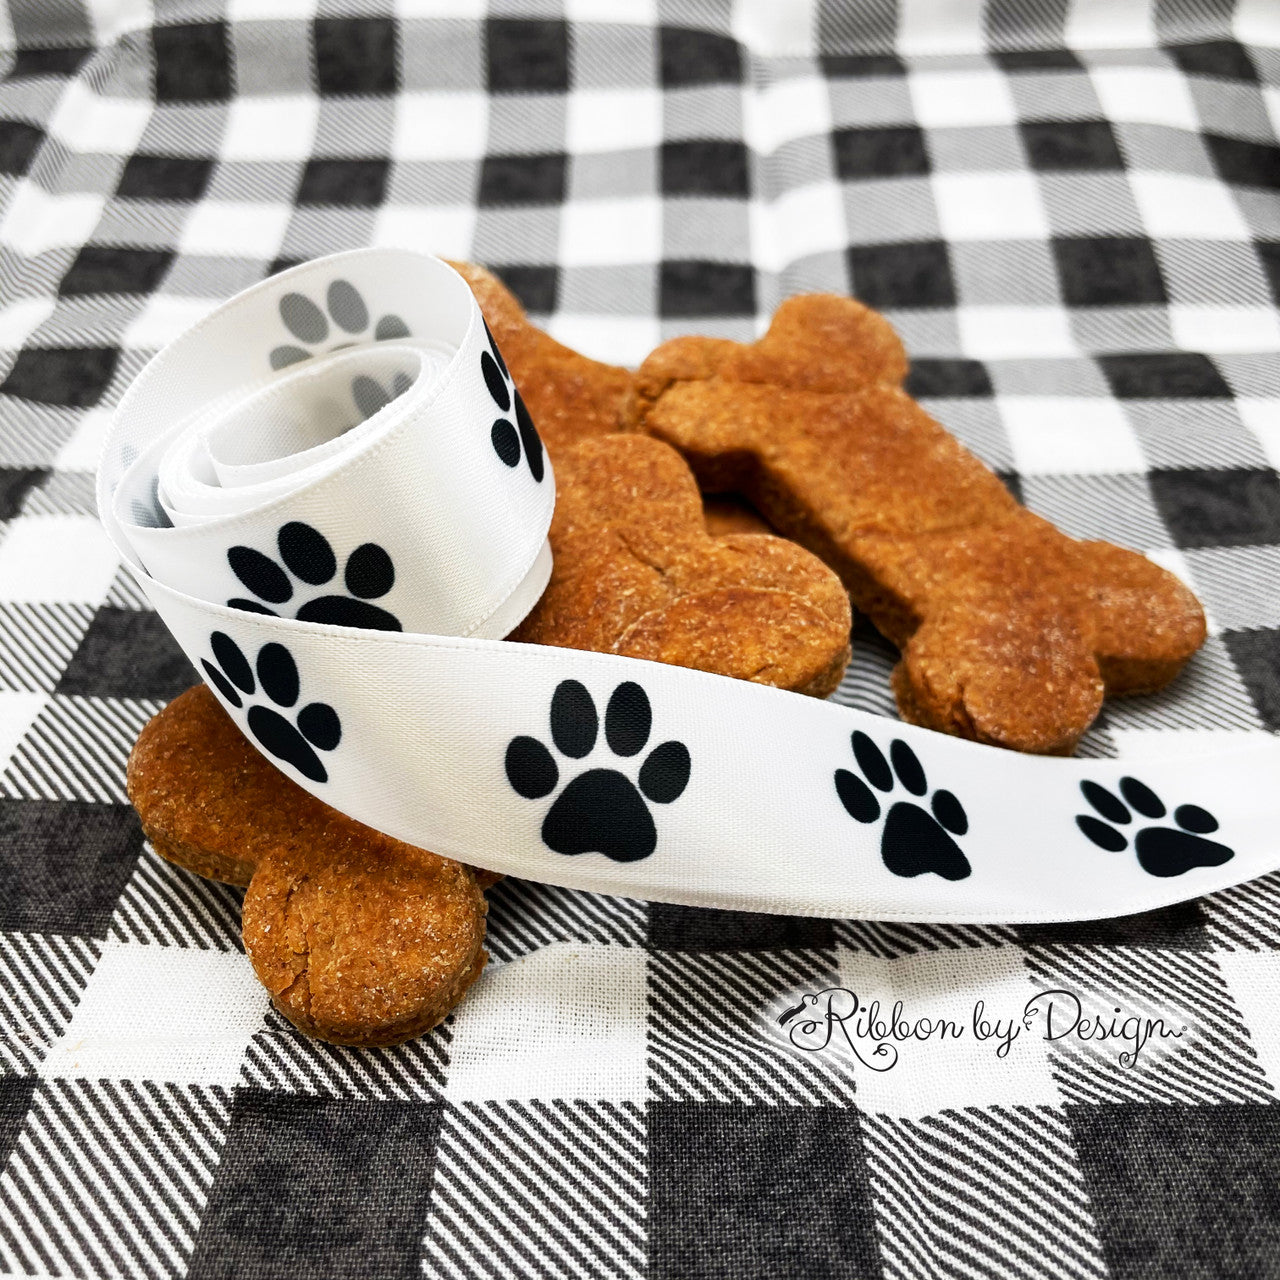 Tie those home made pet cookies with our black and white paw prints for the perfect pet gift!